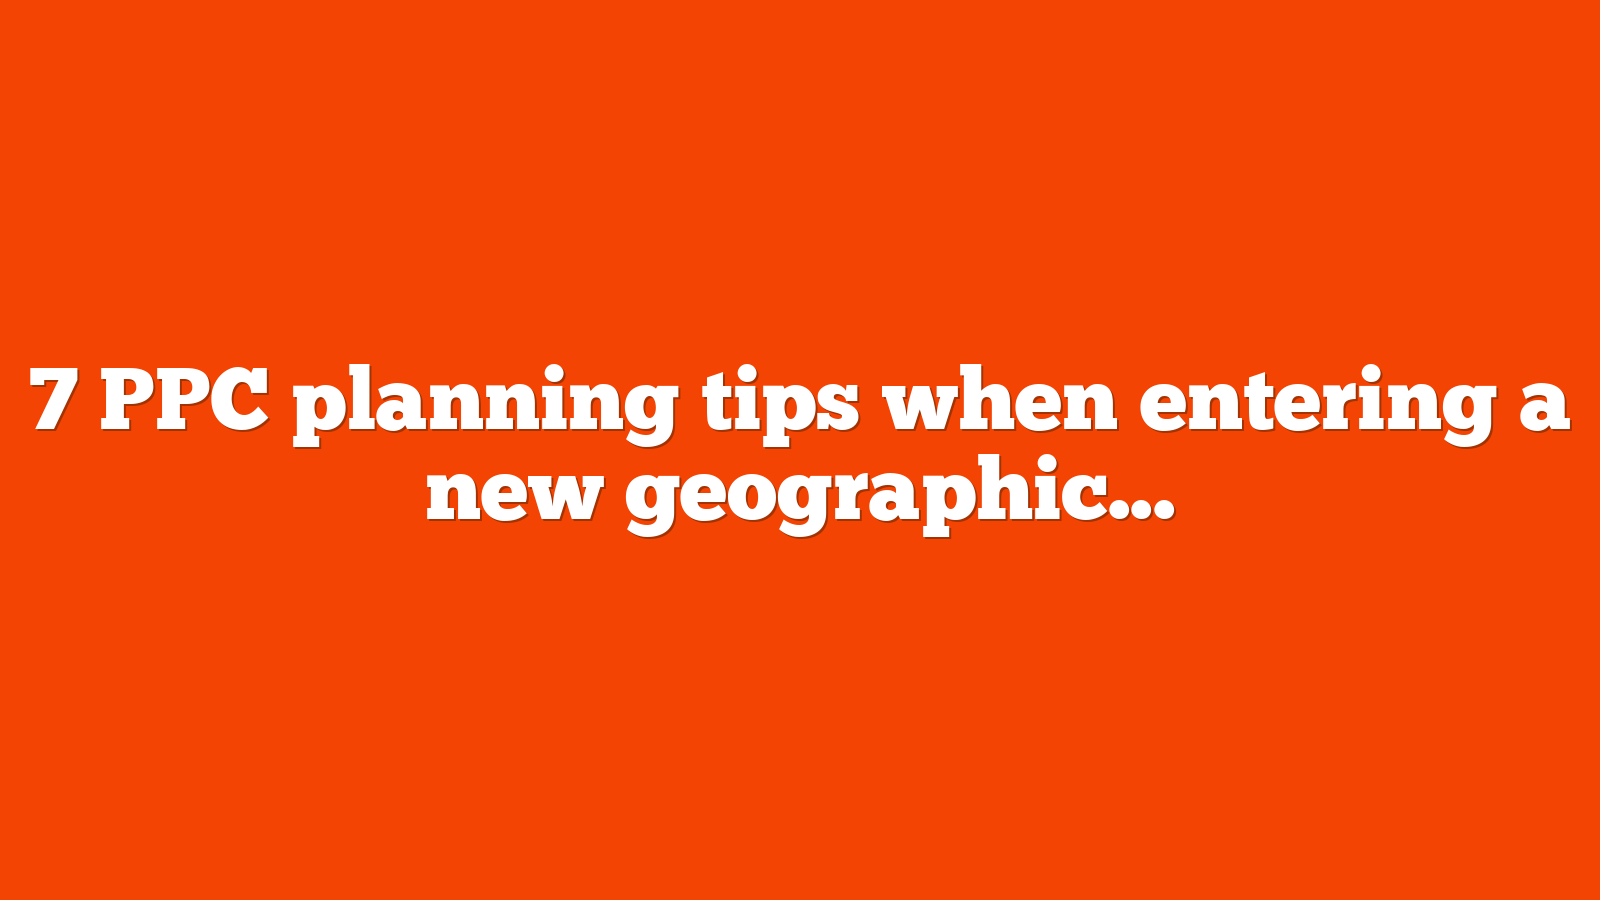 7 PPC planning tips when entering a new geographic market